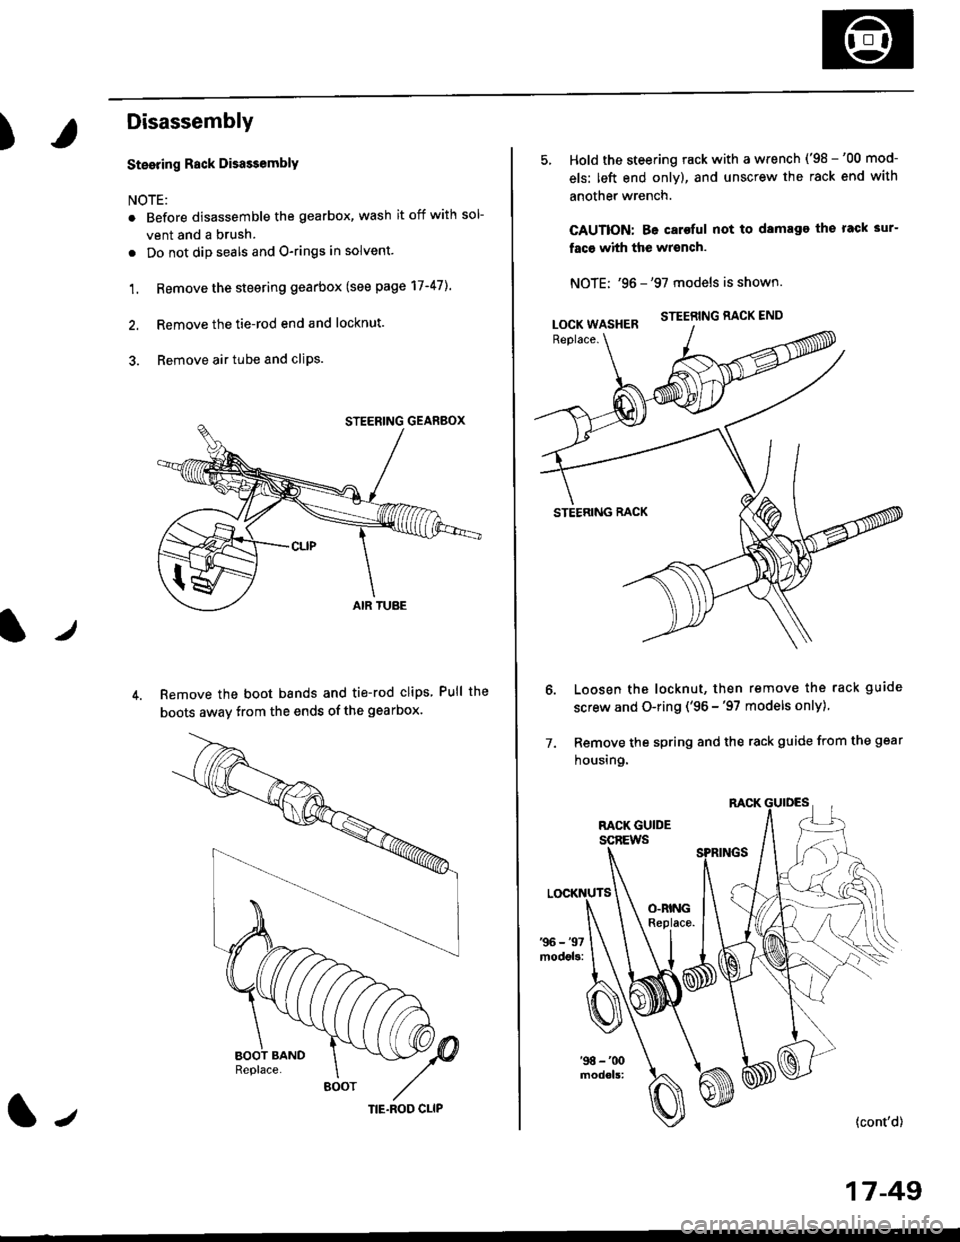 HONDA CIVIC 1998 6.G Owners Guide )
Disassembly
t)
Steering Rack DisassemblY
NOTE:
r Before disassemble the gearbox, wash it off with sol
vent and a brush.
. Do not dip seals and O-rings in solvent.
1. Remove the steering gearbox (see